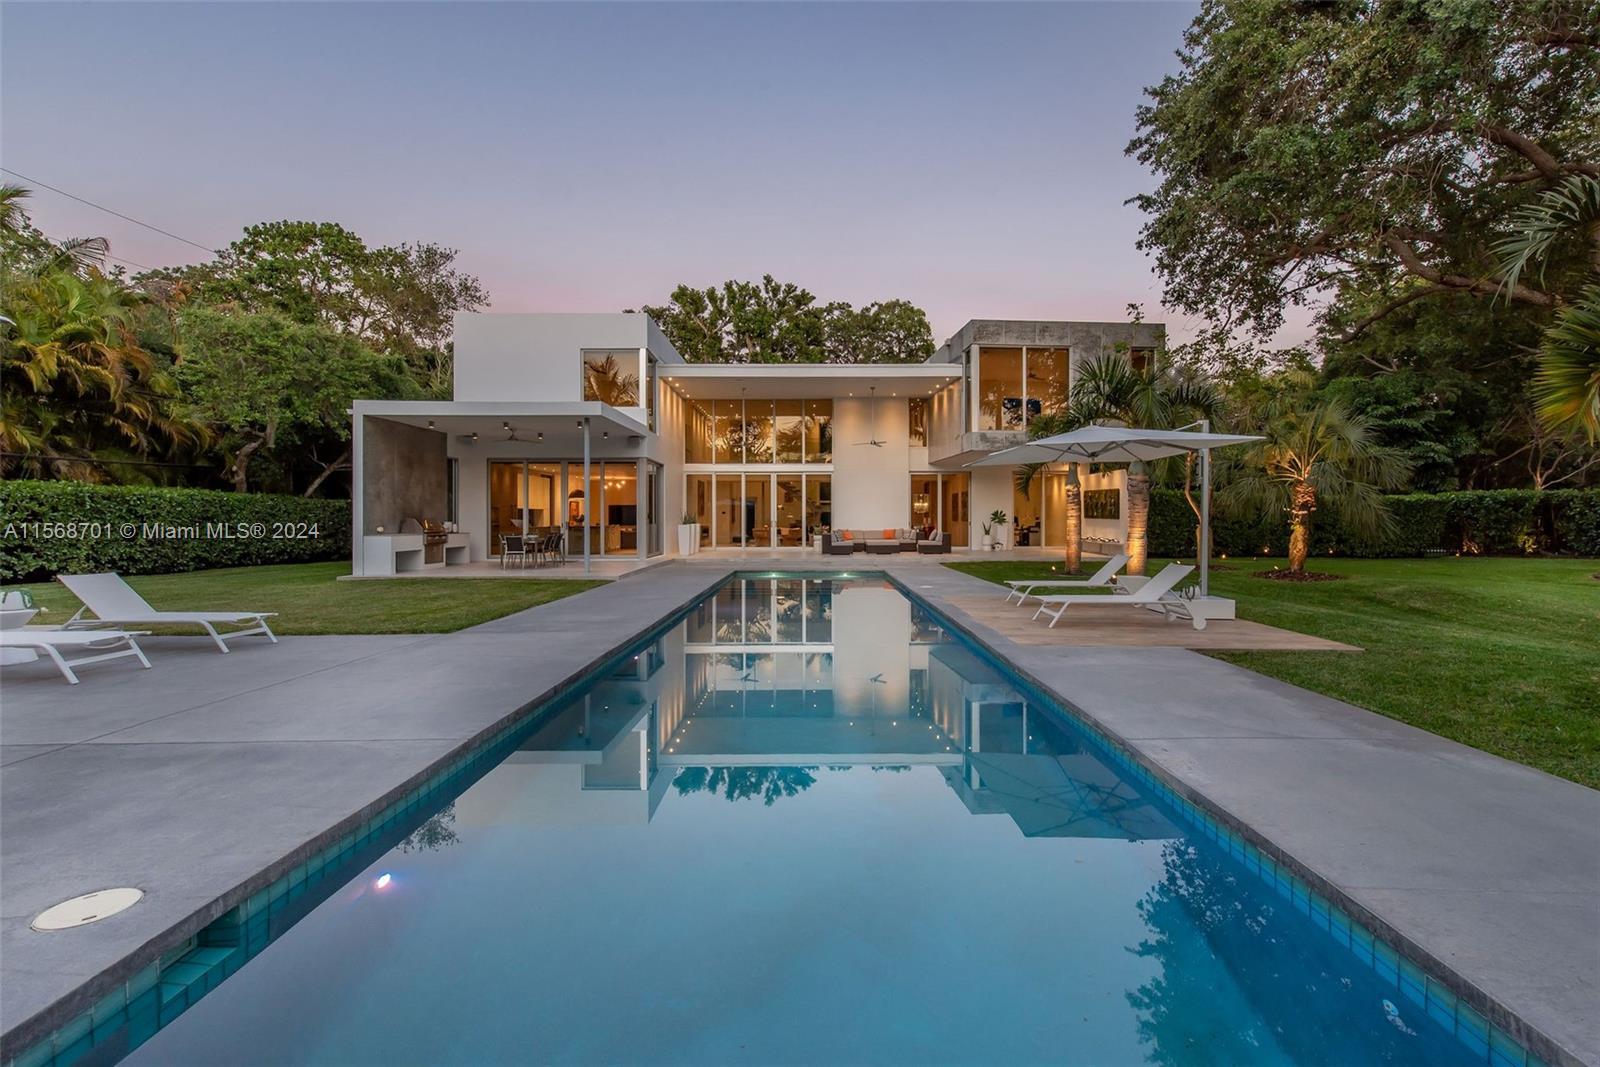 A contemporary masterpiece in the sought-after neighborhood of Pinecrest. This Bauhaus style propert